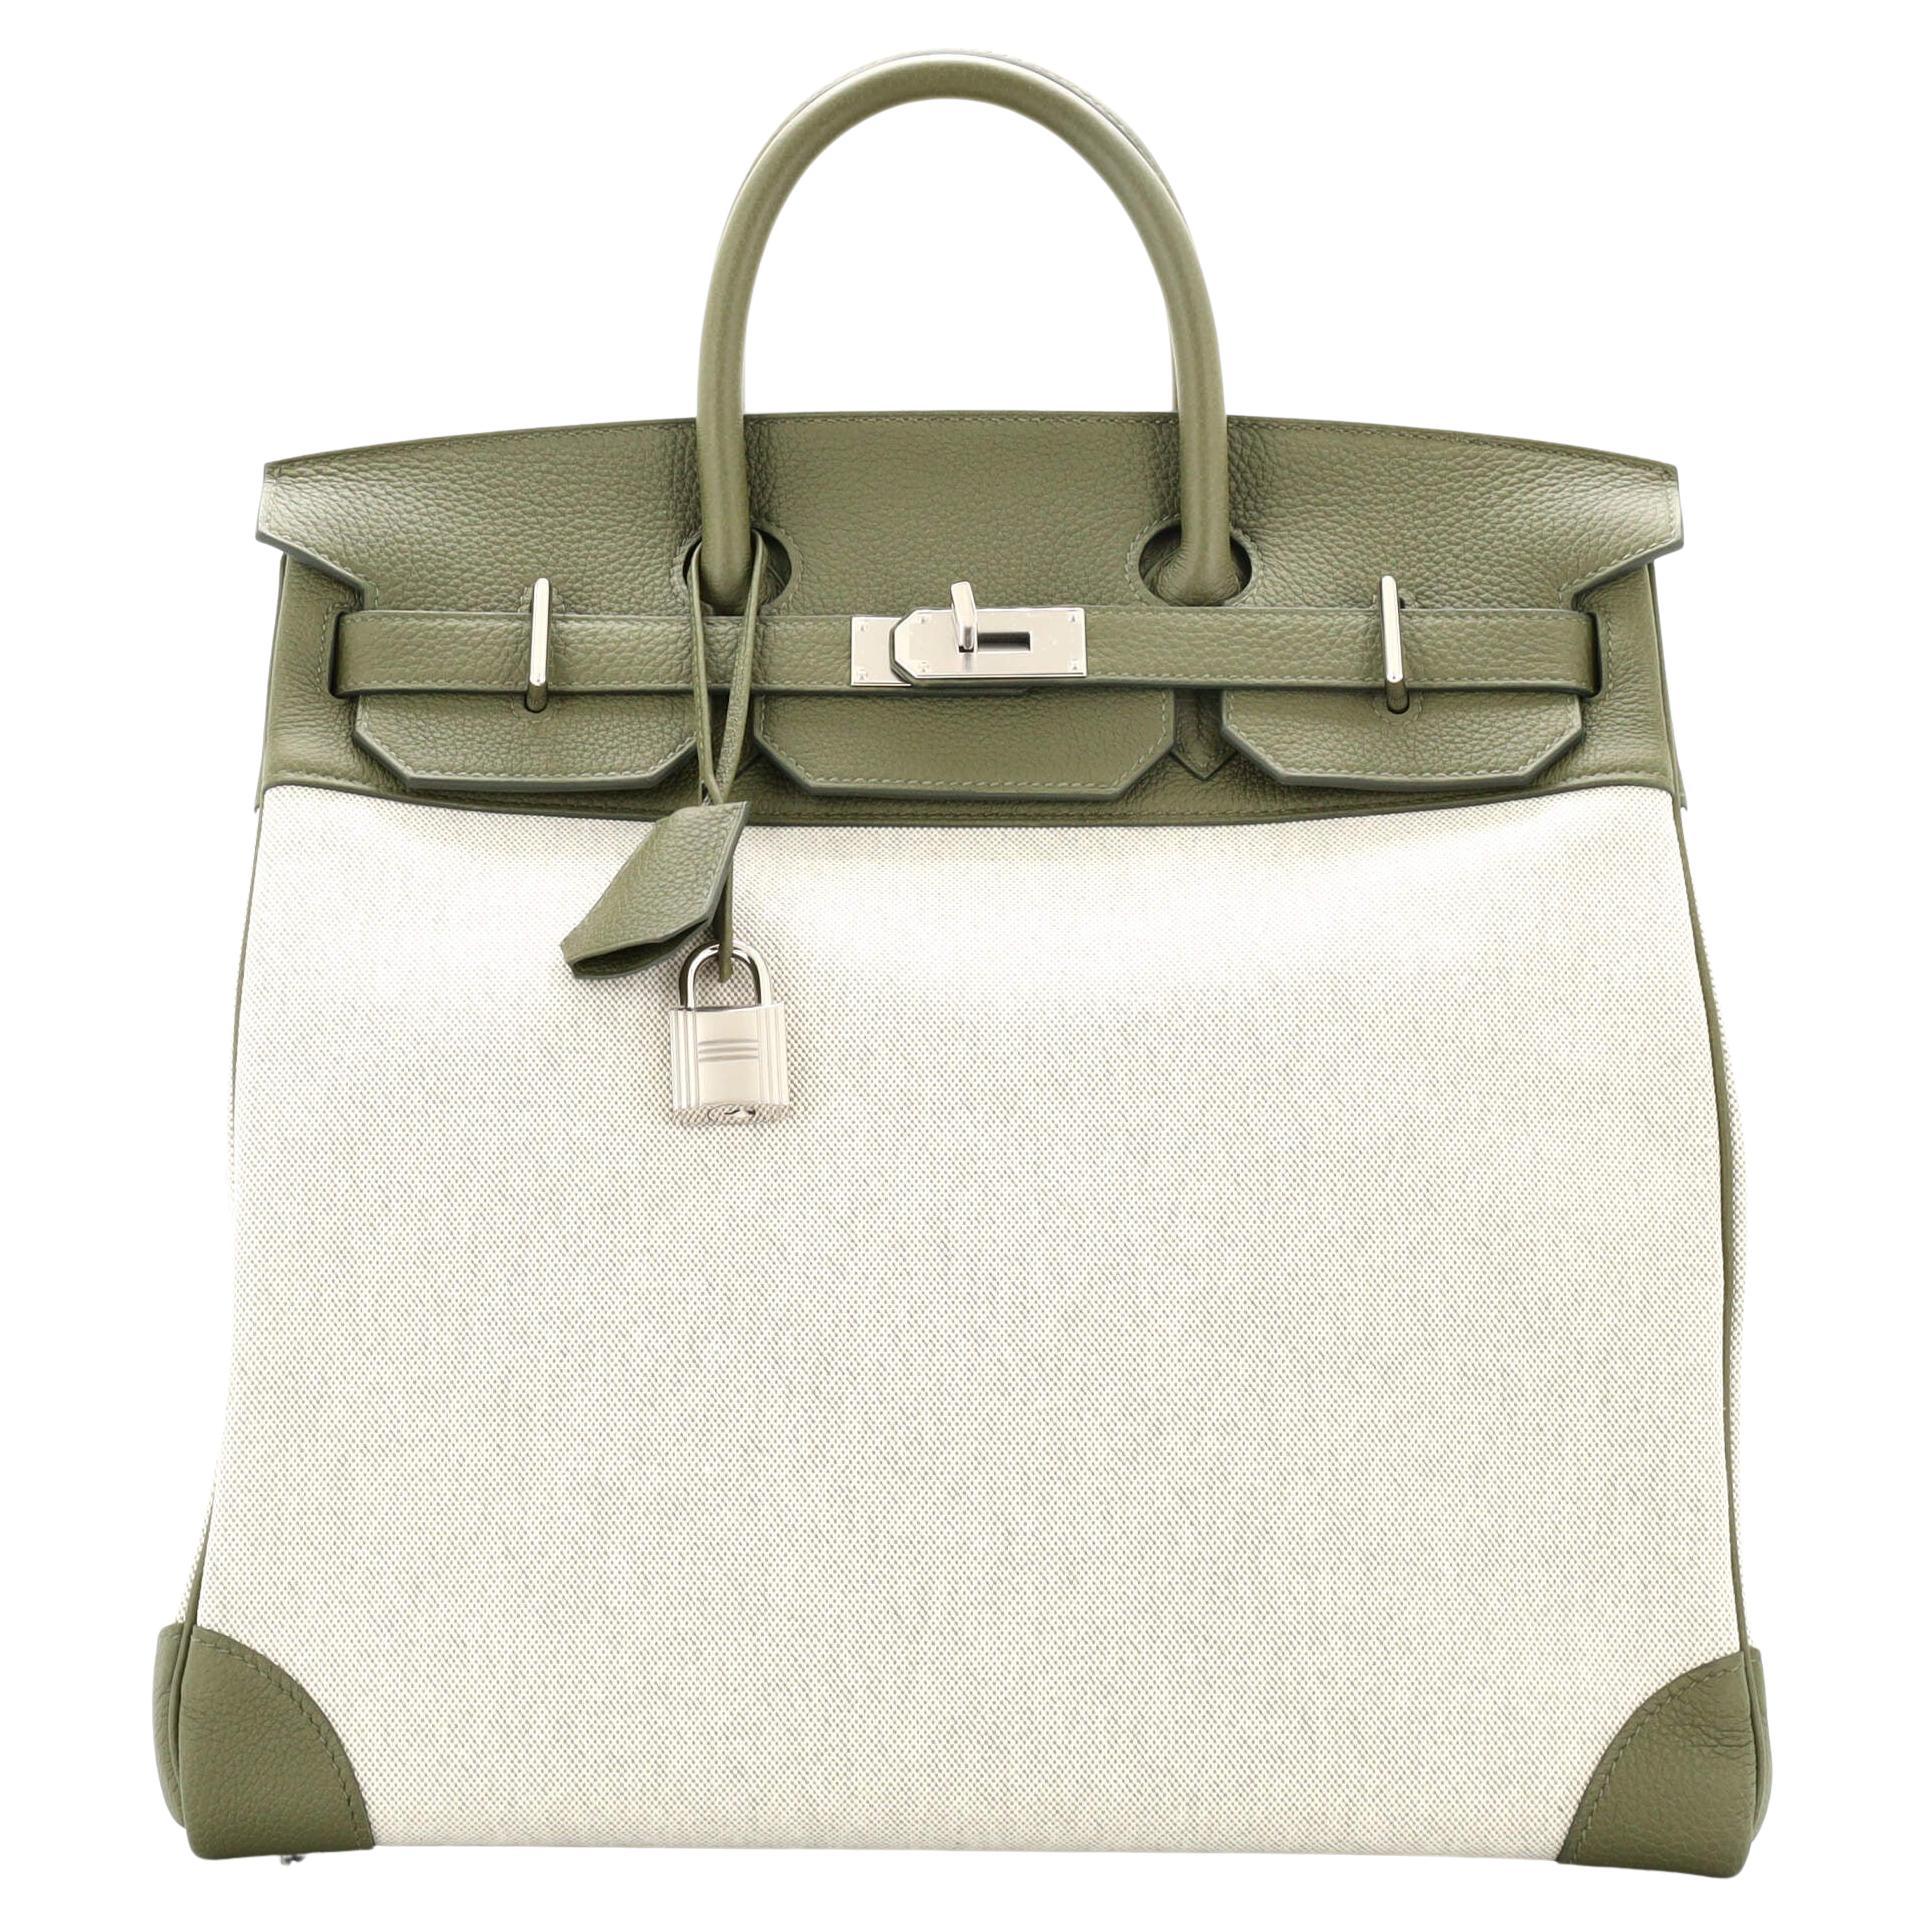 Hermes HAC Birkin Bag Toile and Green Clemence with Palladium Hardware 40